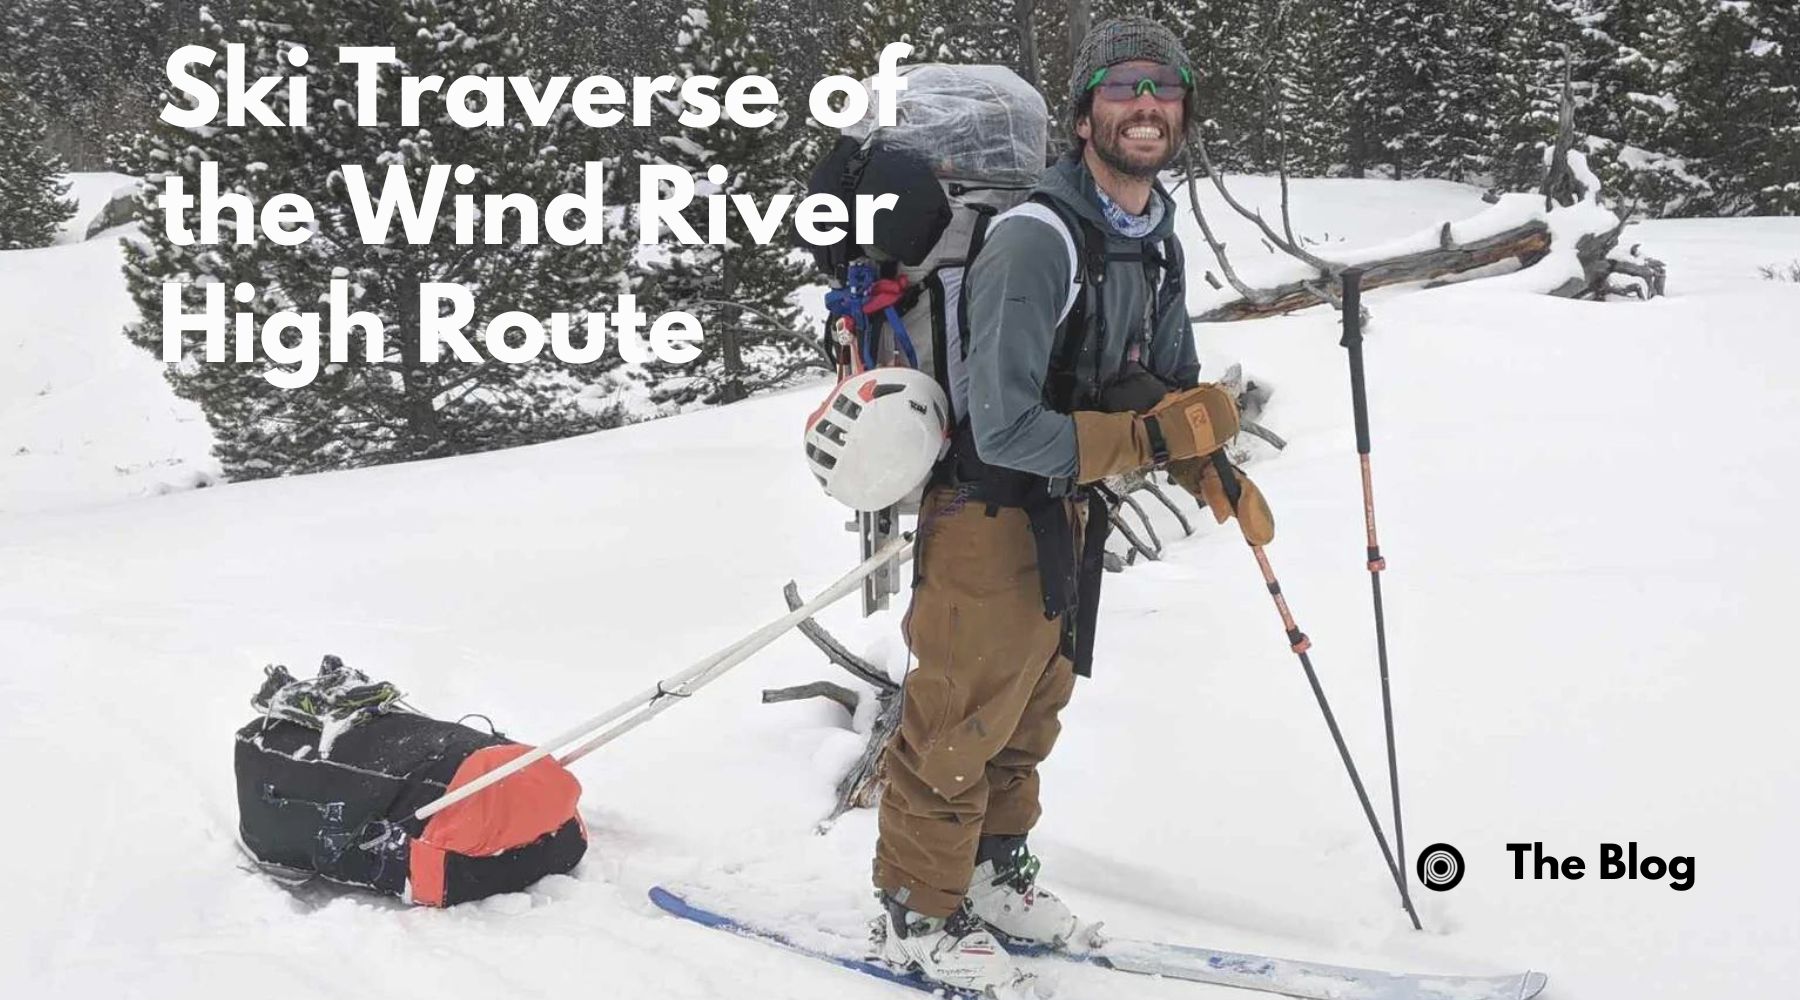 Wind River High Route